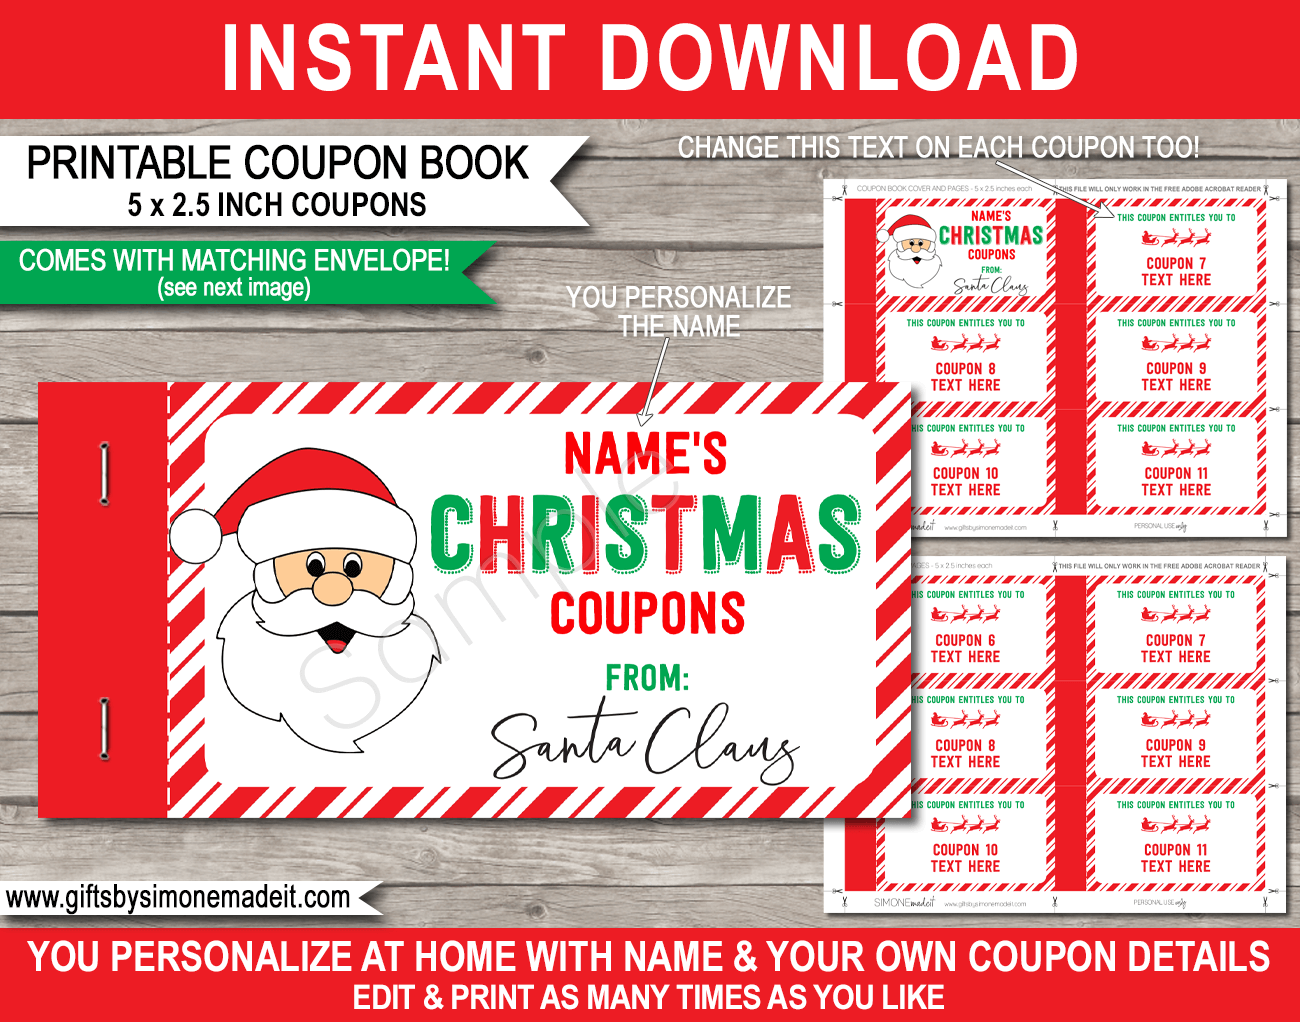 coupon-book-from-santa-template-printable-personalized-christmas-gift